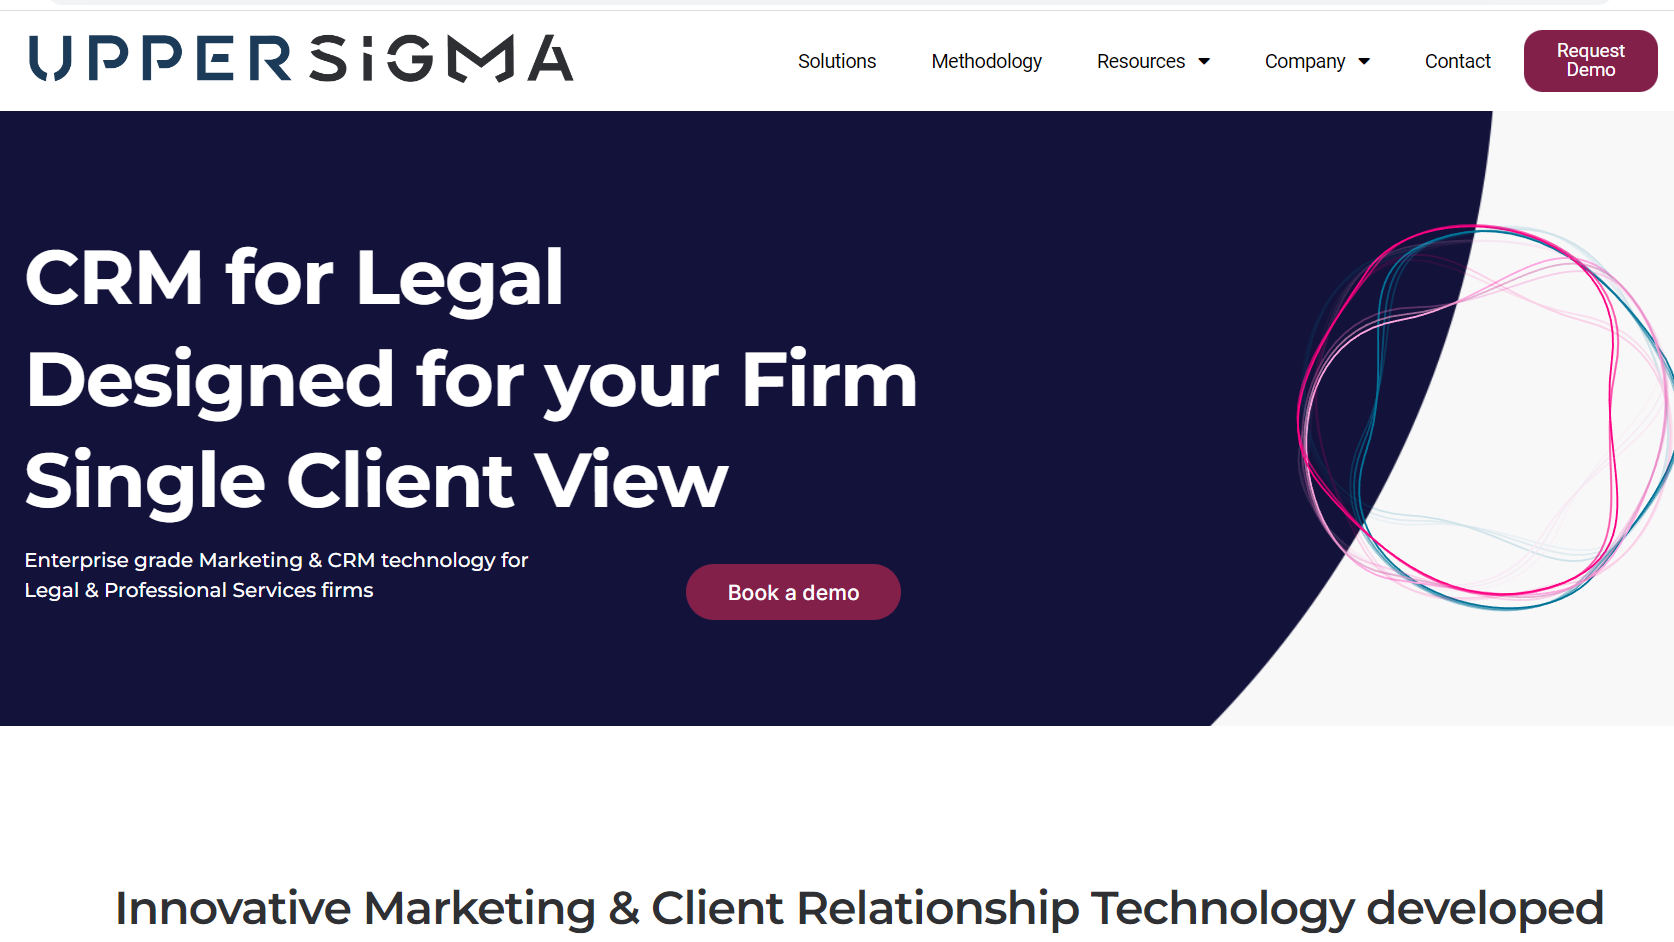 With Acquisition Of Upper Sigma, Litera Poised to Provide Integrated Legal CRM and Experience Management